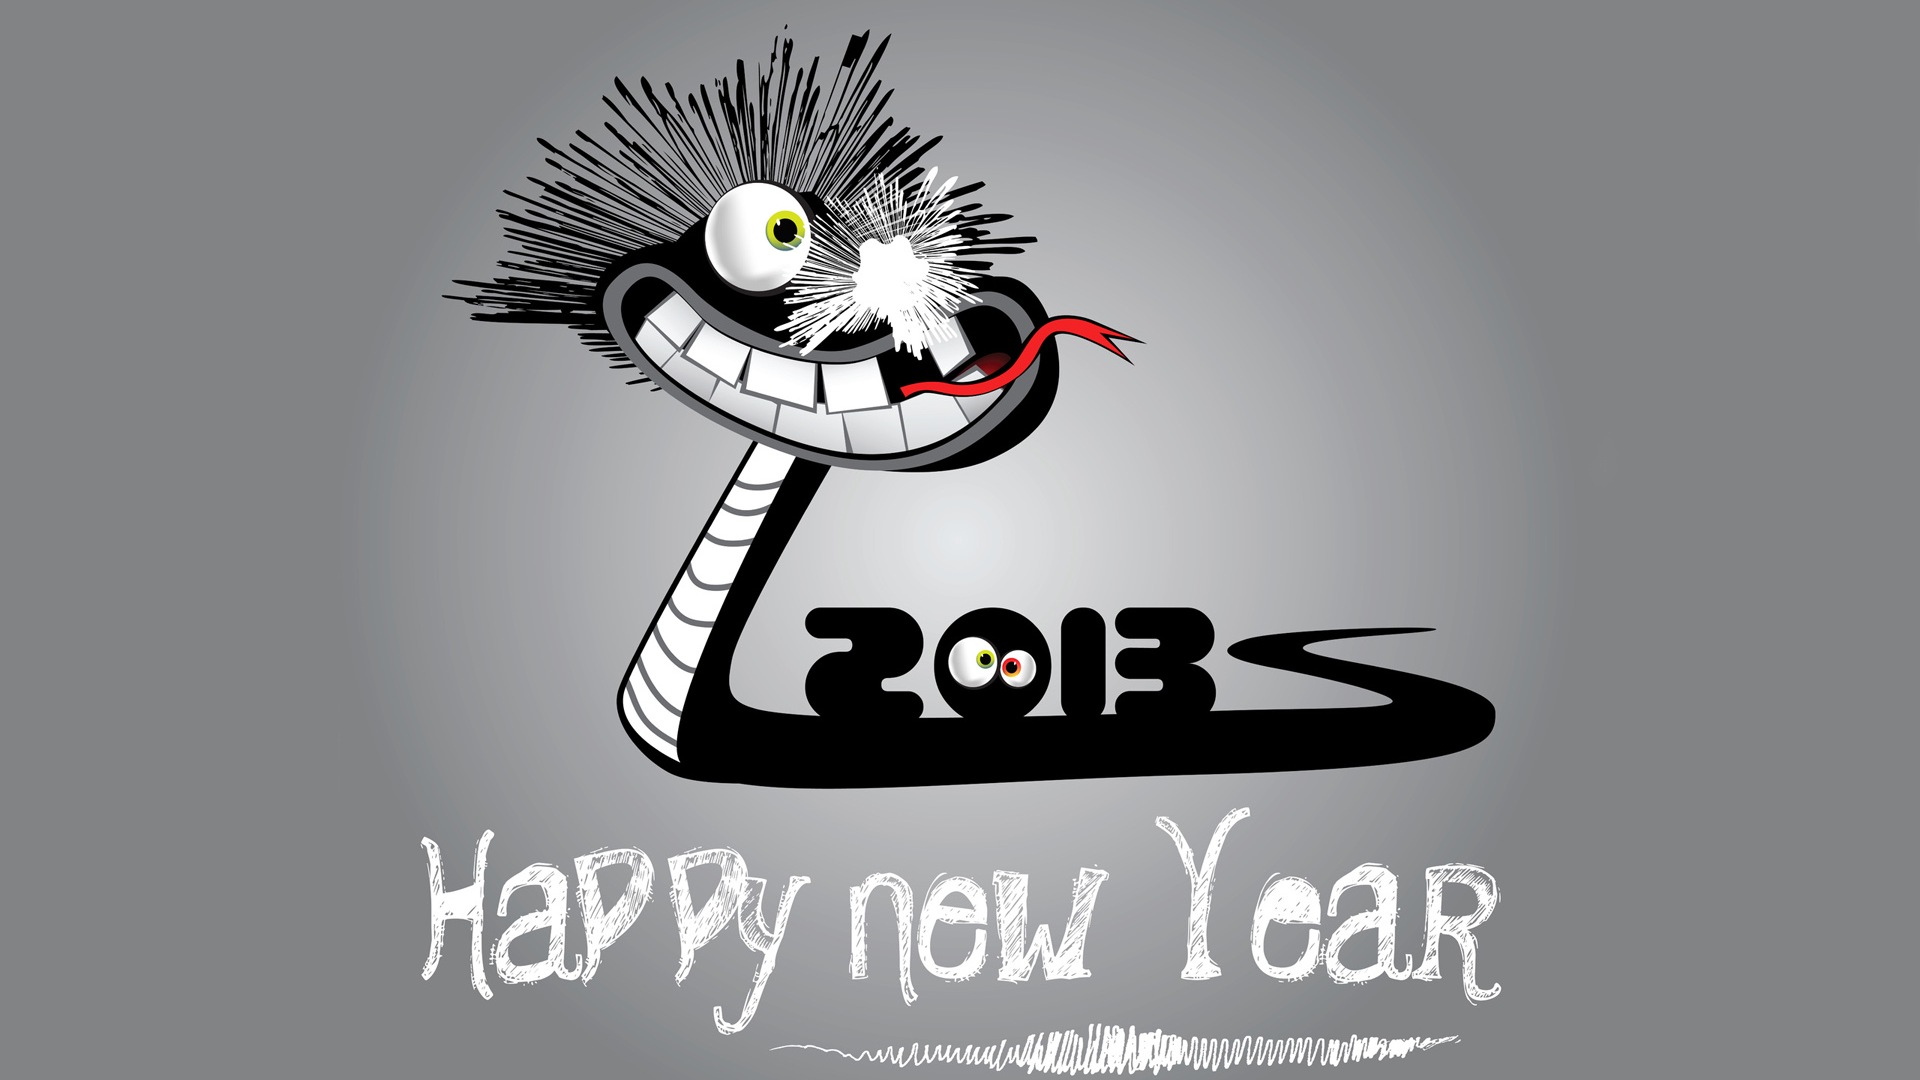 2013 Happy New Year HD wallpapers #19 - 1920x1080